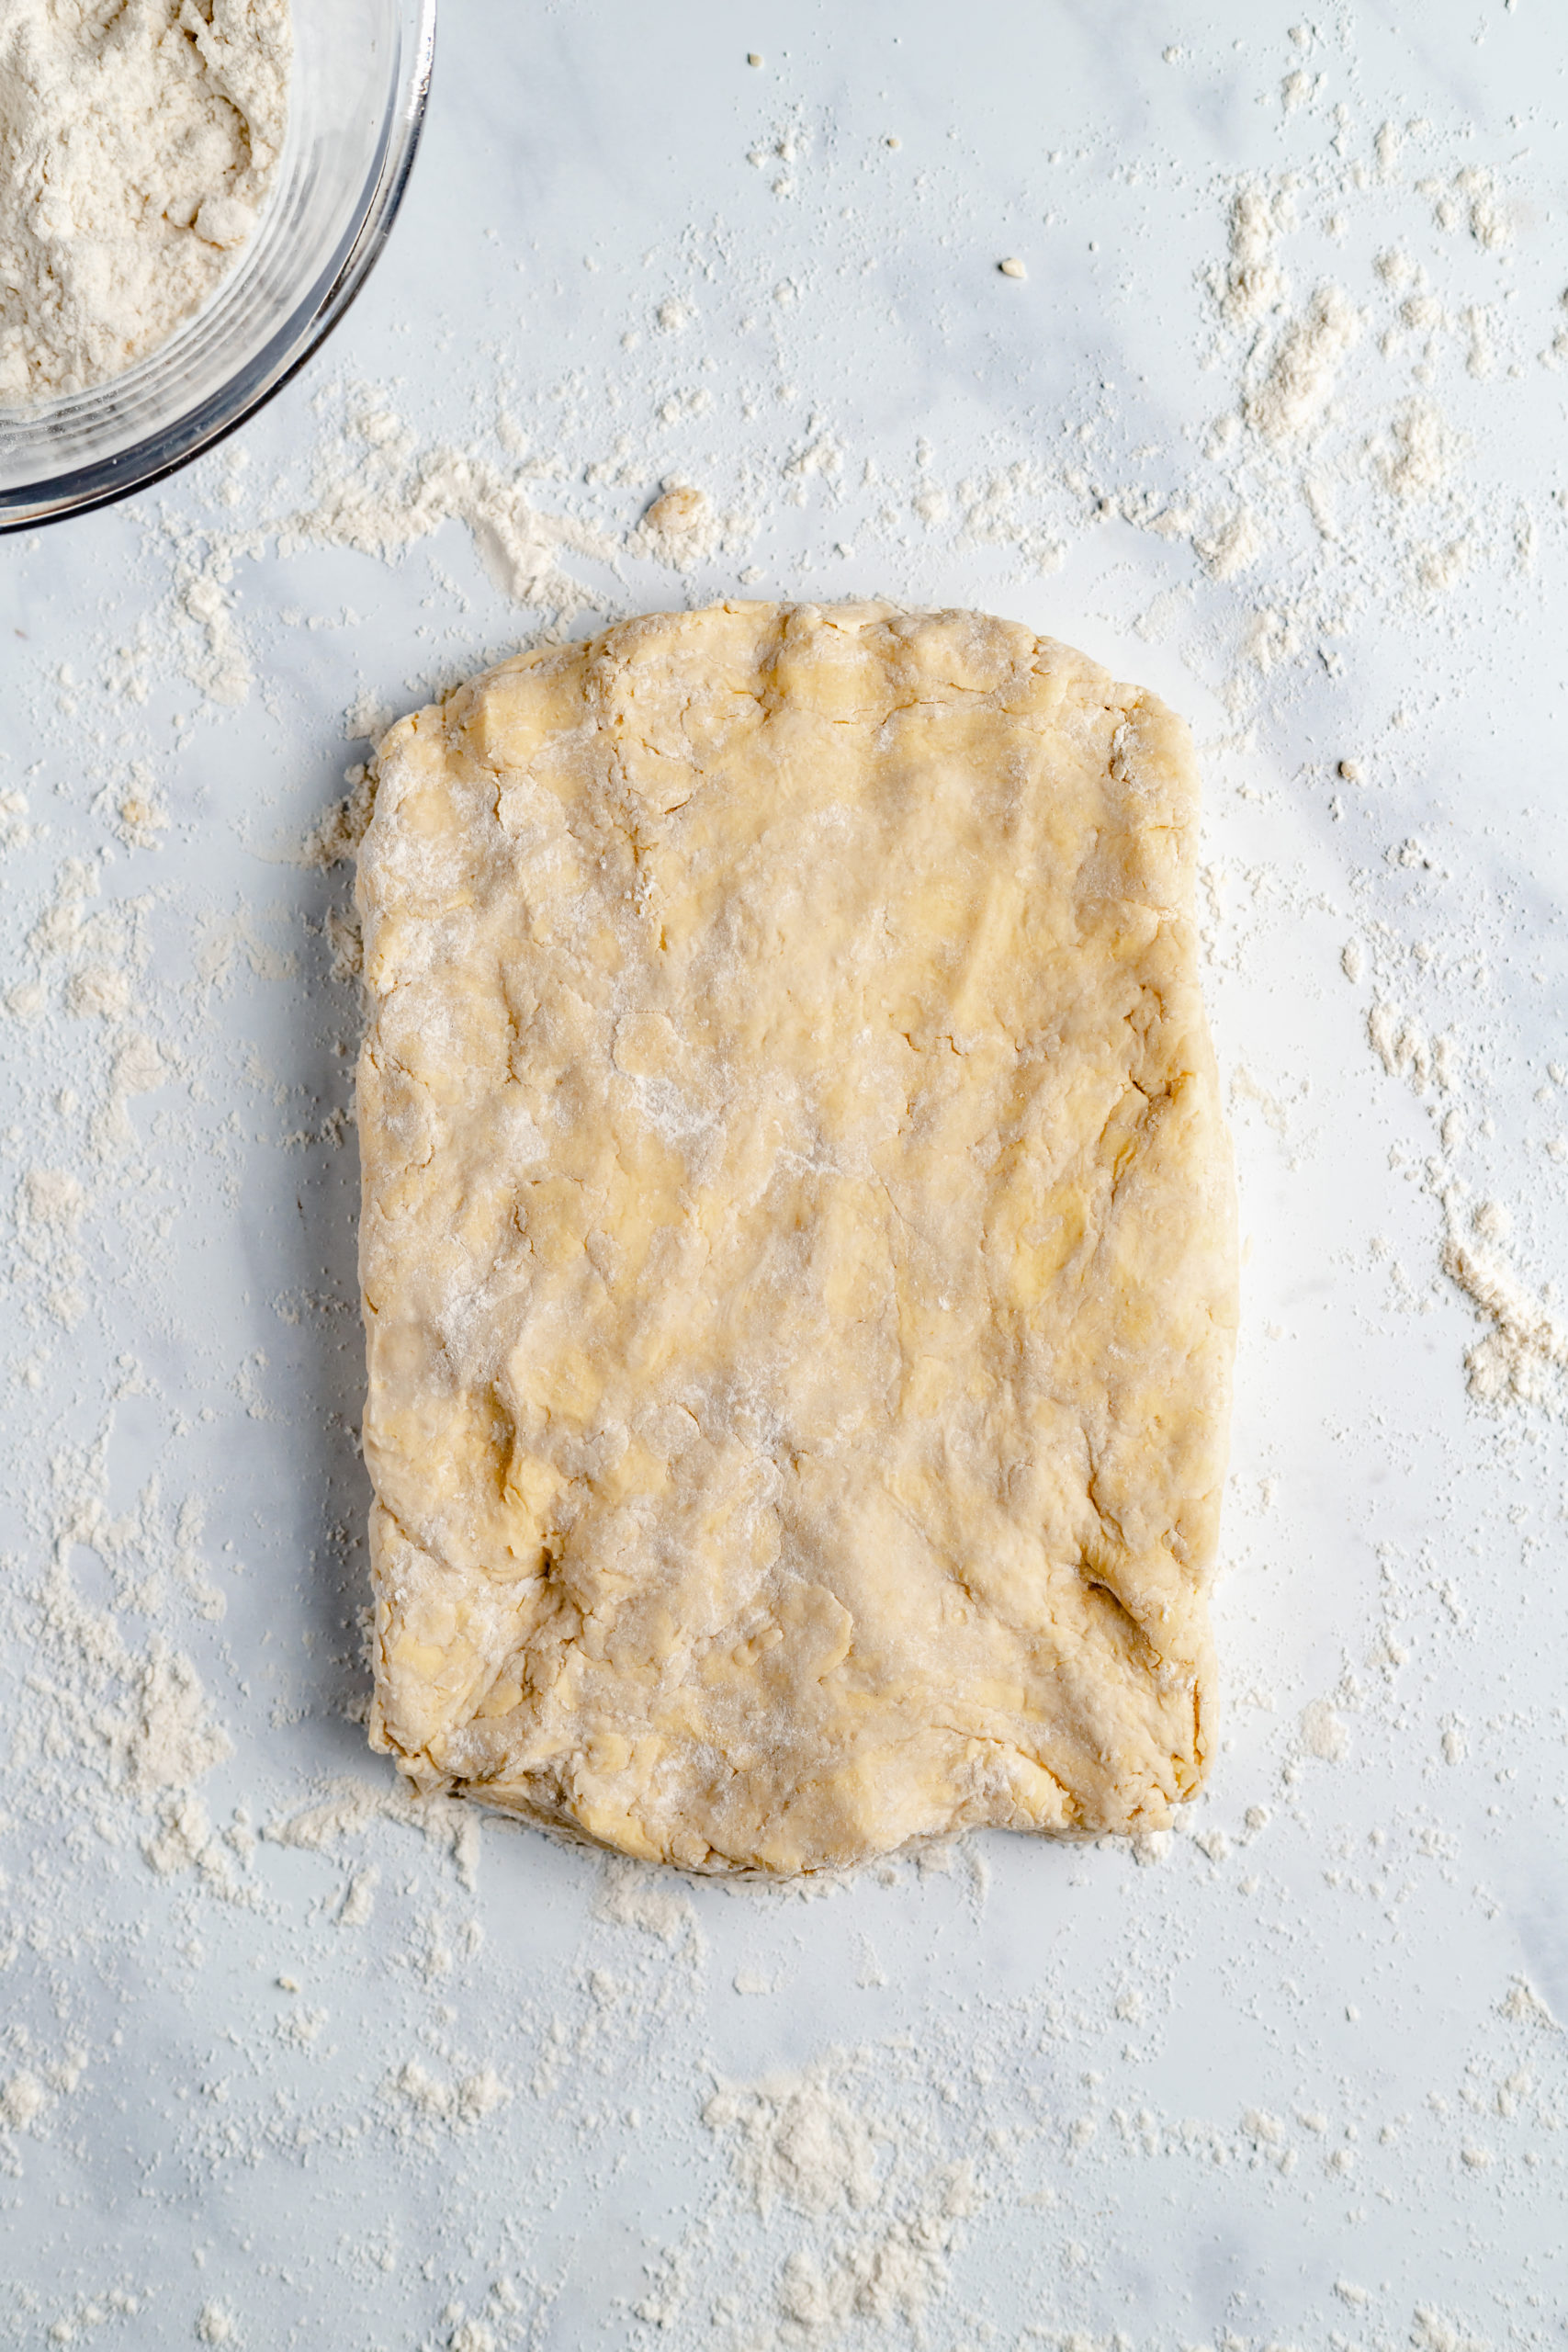 A Rolled-Out Slab of Vegan Biscuit Dough on a White Counter